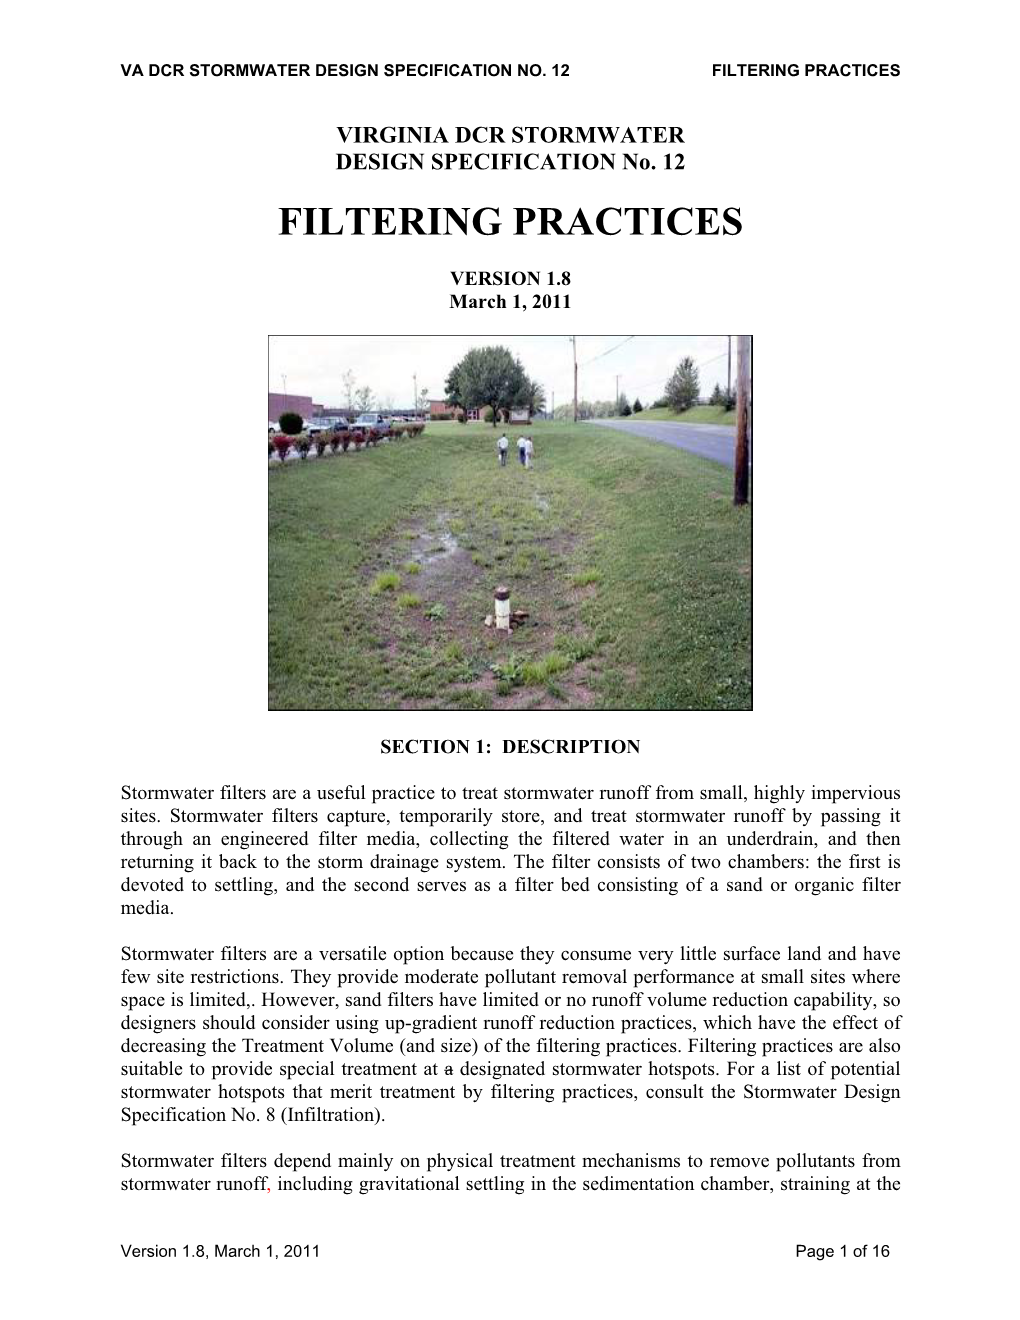 Filtering Practices